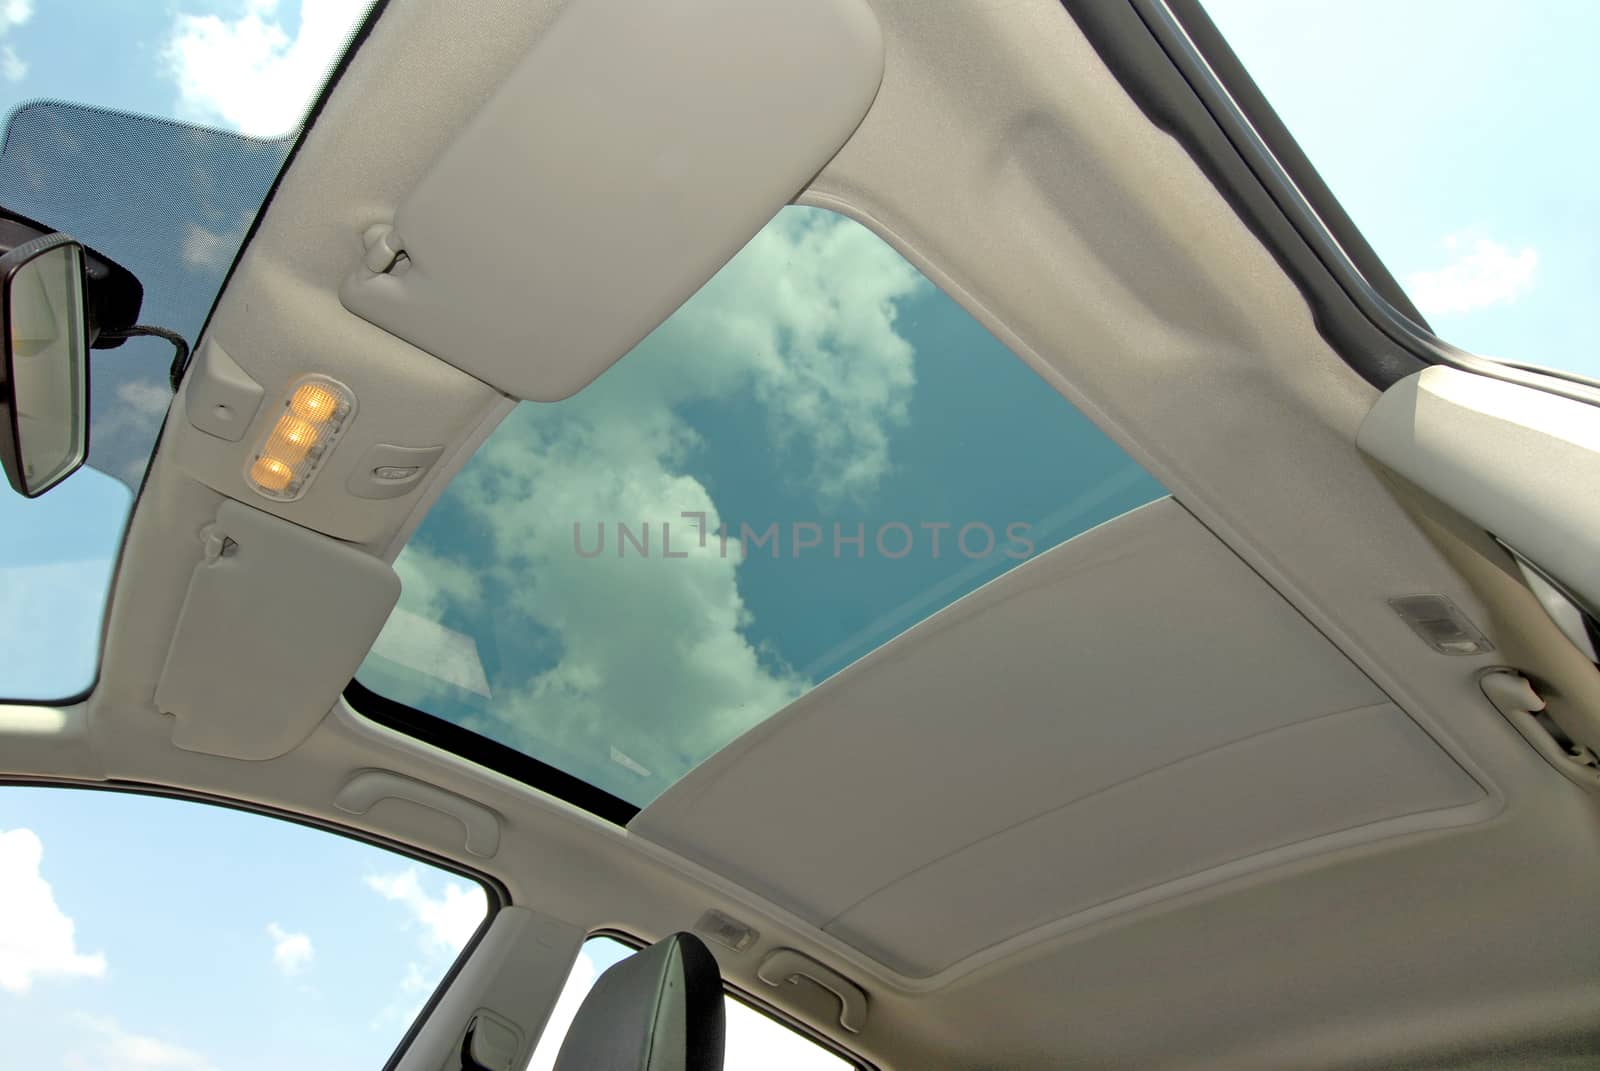 Panoramic sunroof in a passenger car by aselsa